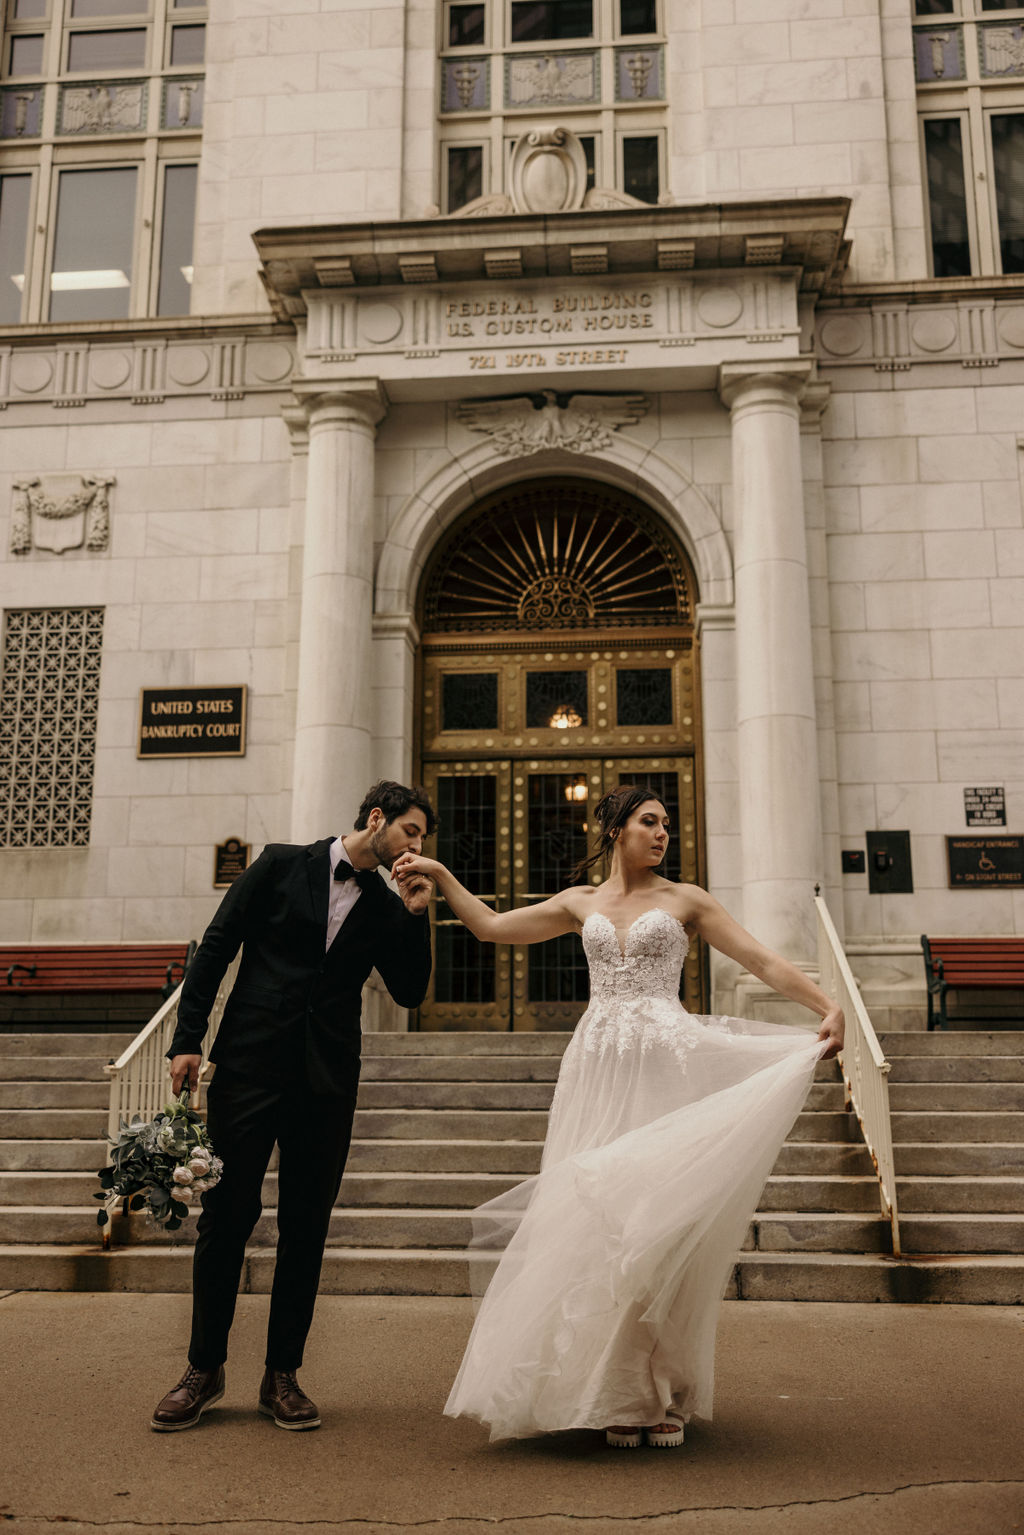 bride and groom dance in front of courthouse during second wedding elopement.